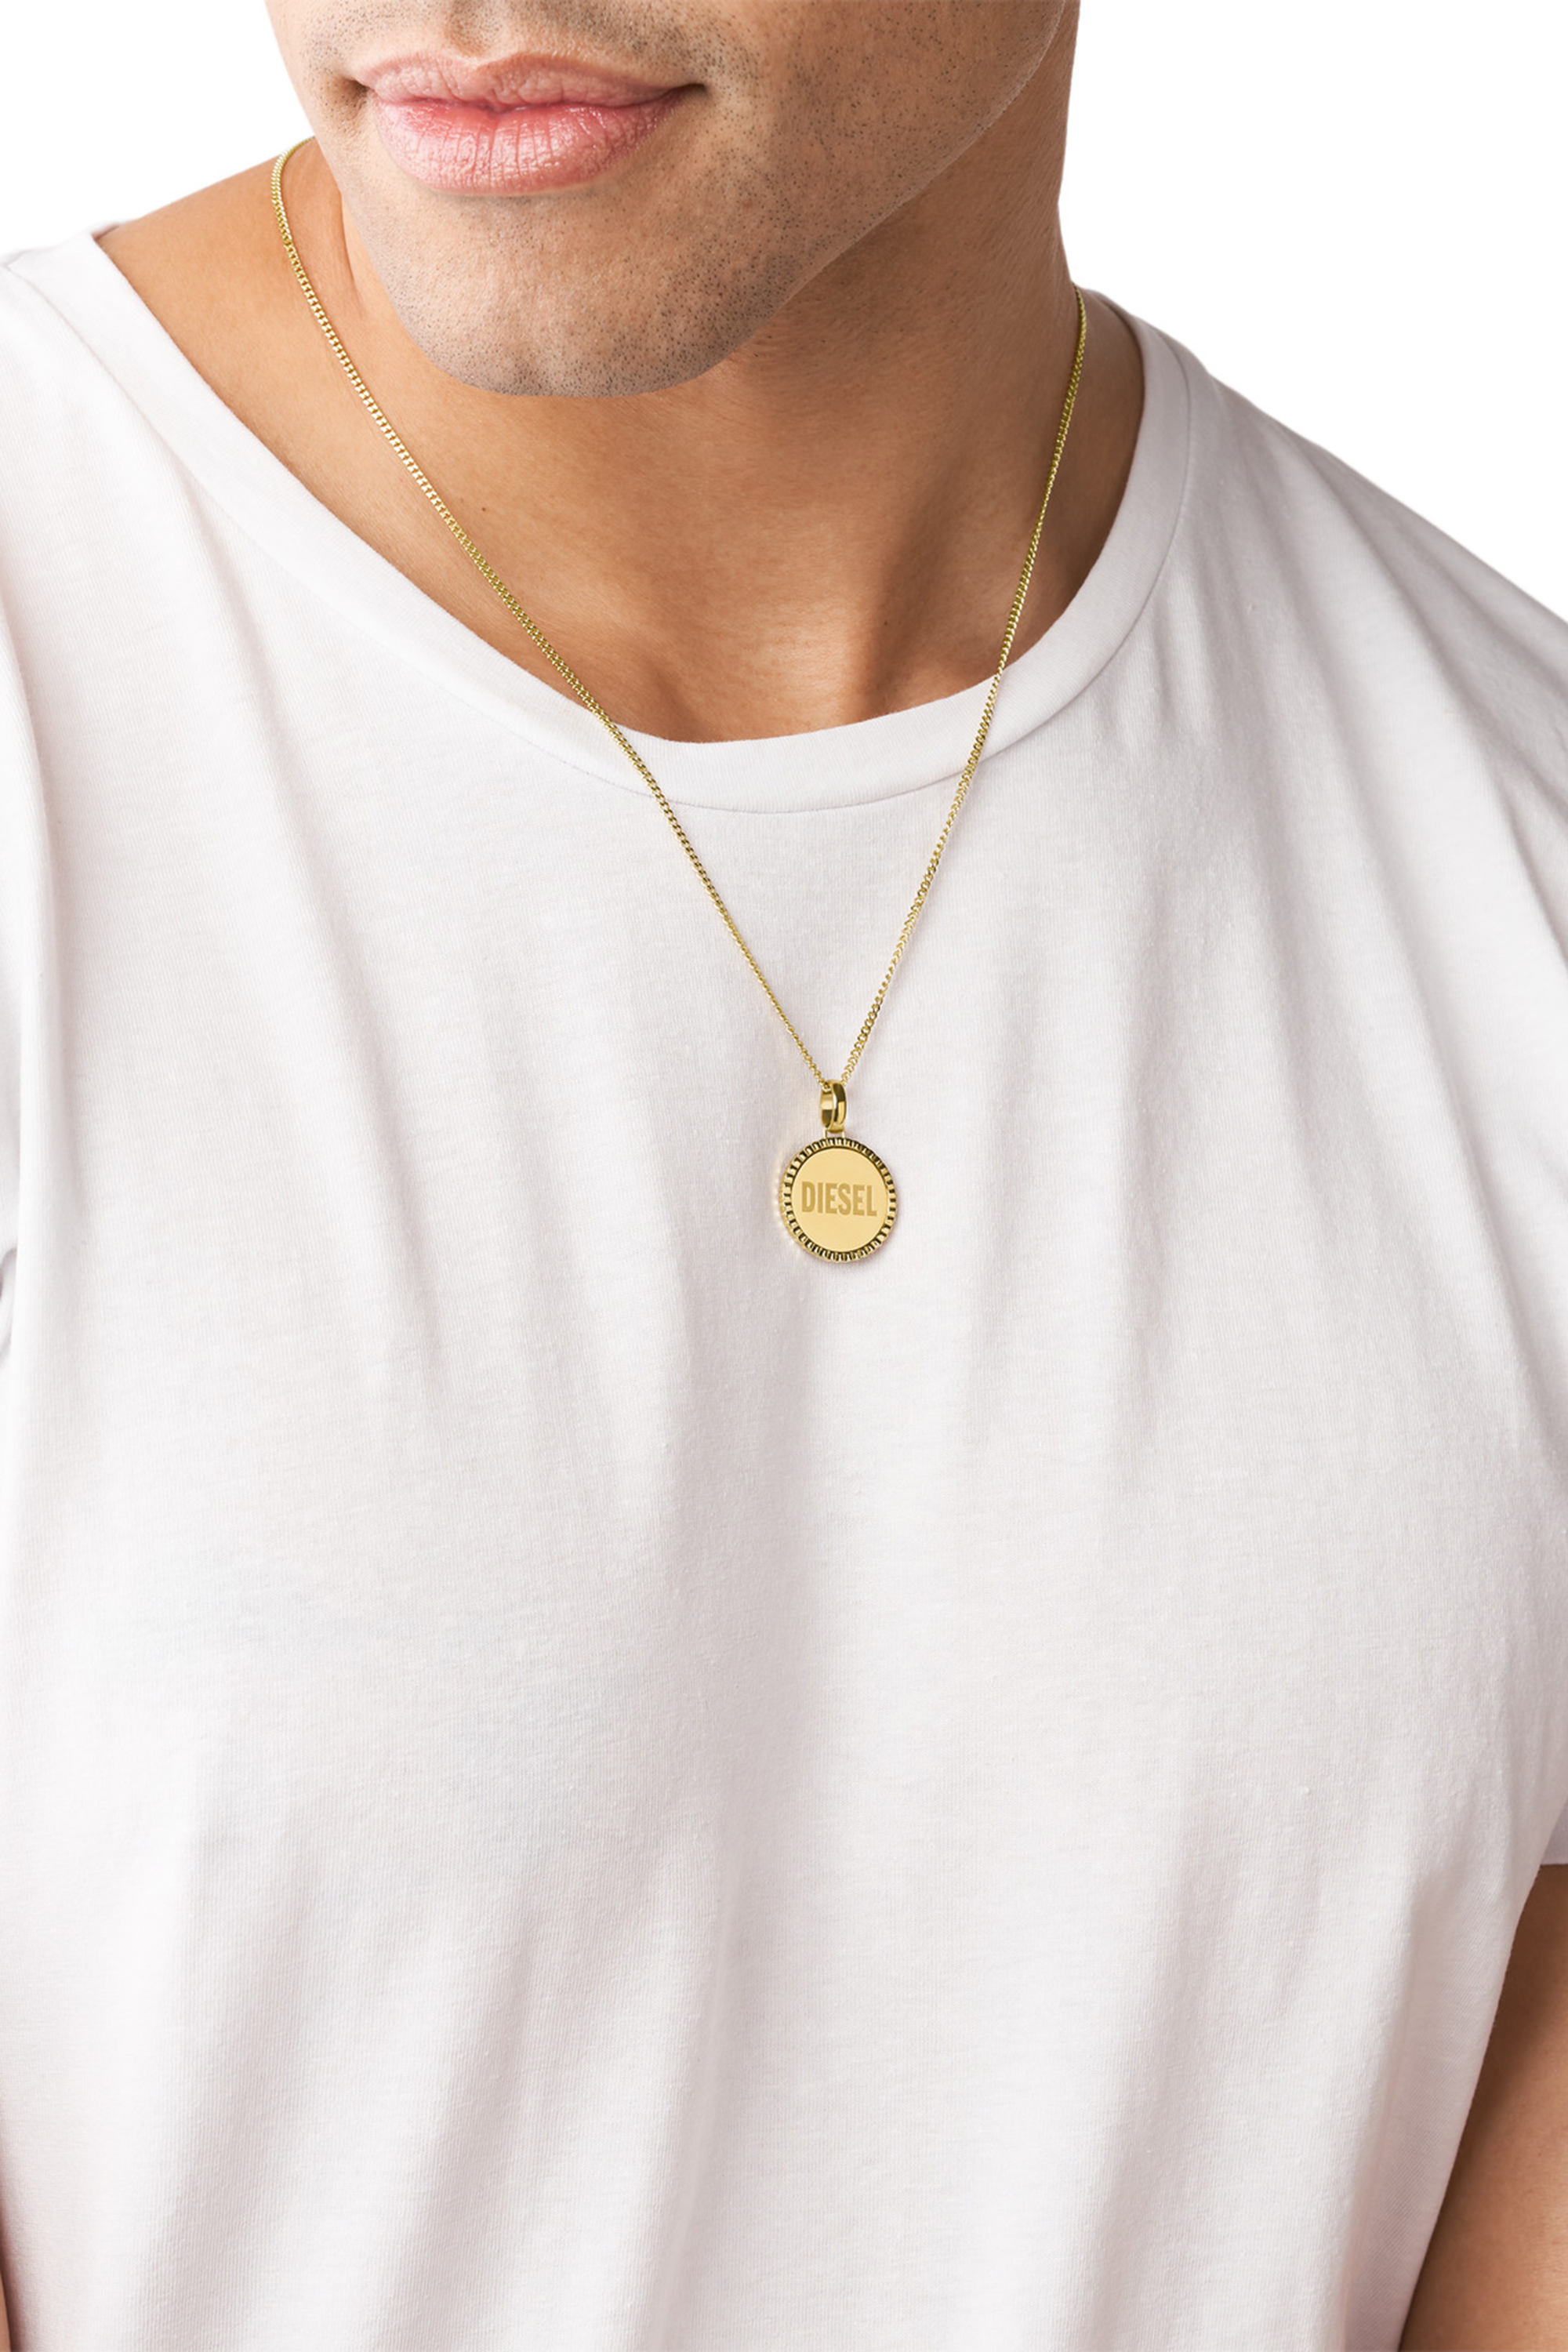 Diesel - DX1361, Unisex Gold stainless steel pendant necklace in Gold - Image 3